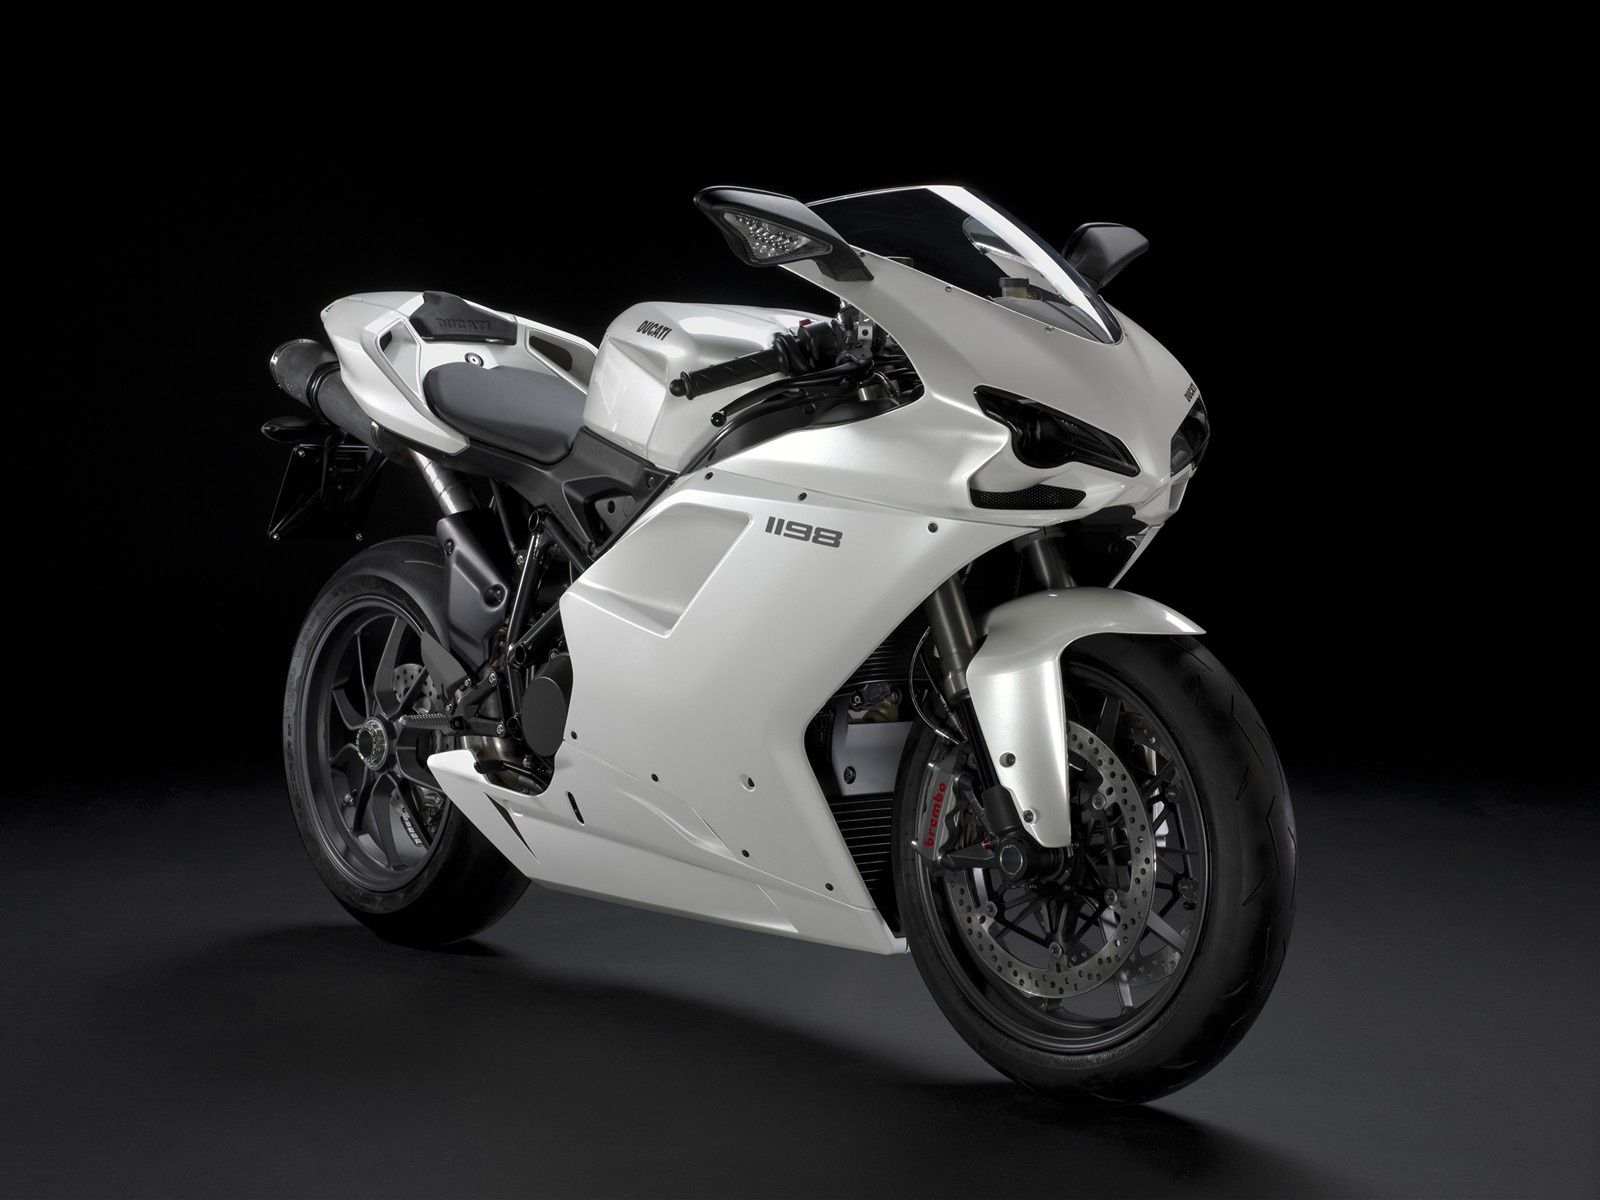 Ducati 1198 White Wallpapers HD Backgrounds